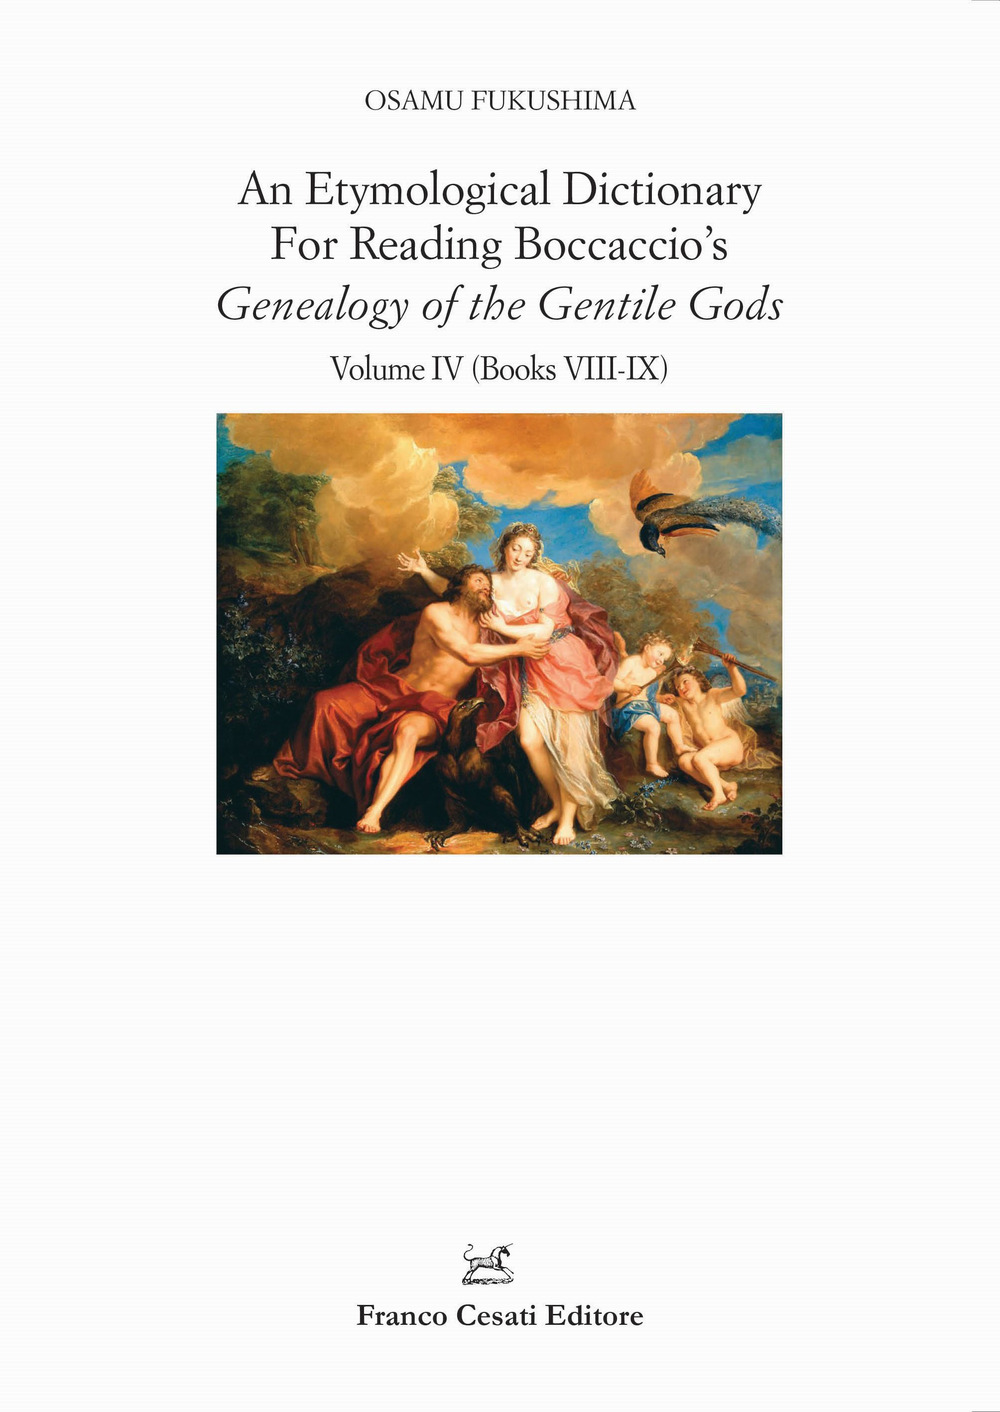 An etymological dictionary for reading Boccaccio's «Genealogy of the gentile gods». Vol. 4: Books VIII-IX